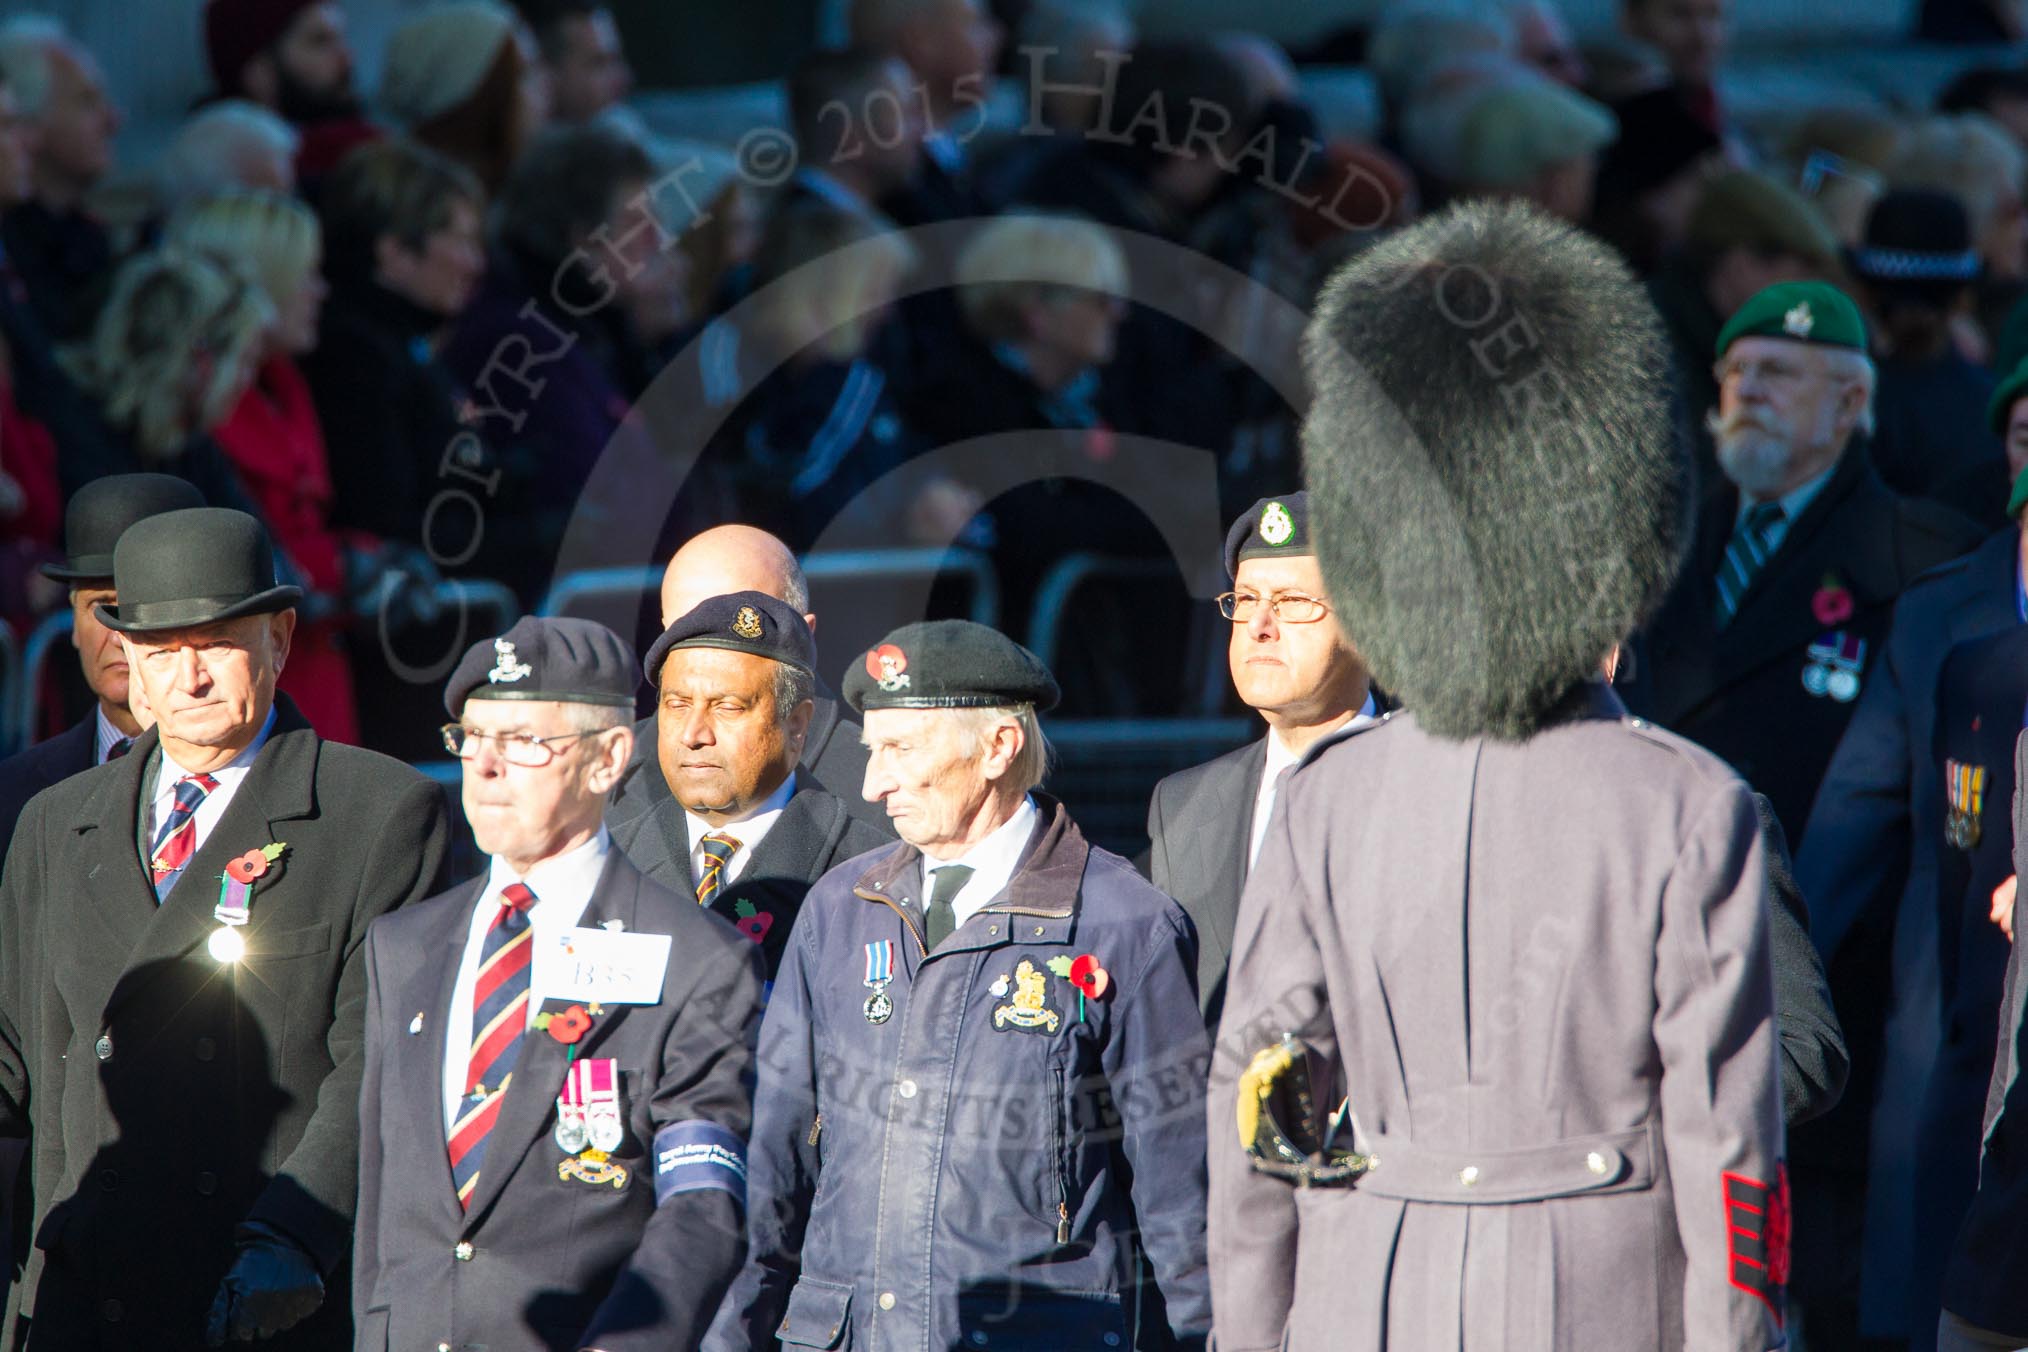 Remembrance Sunday Cenotaph March Past 2013: B35 - Royal Army Pay Corps Regimental Association..
Press stand opposite the Foreign Office building, Whitehall, London SW1,
London,
Greater London,
United Kingdom,
on 10 November 2013 at 12:04, image #1607